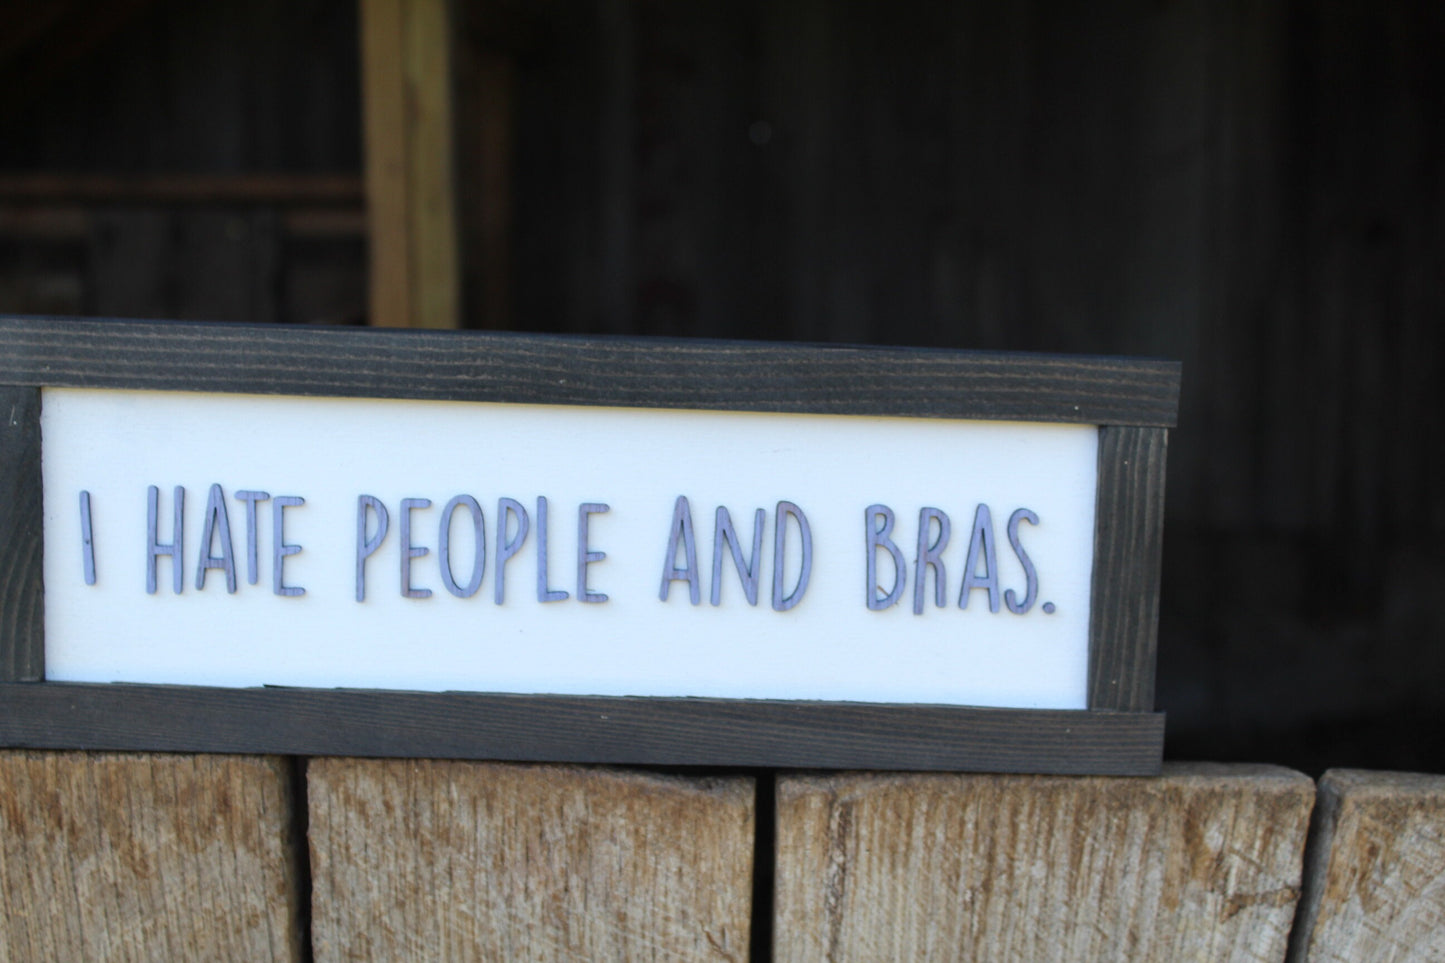 I Hate People And Bras Wood Sign Raised Text Wall Hanging Decoration Rustic Gift Decor Introvert Loner Solitary Sarcastic Comfy Clothes